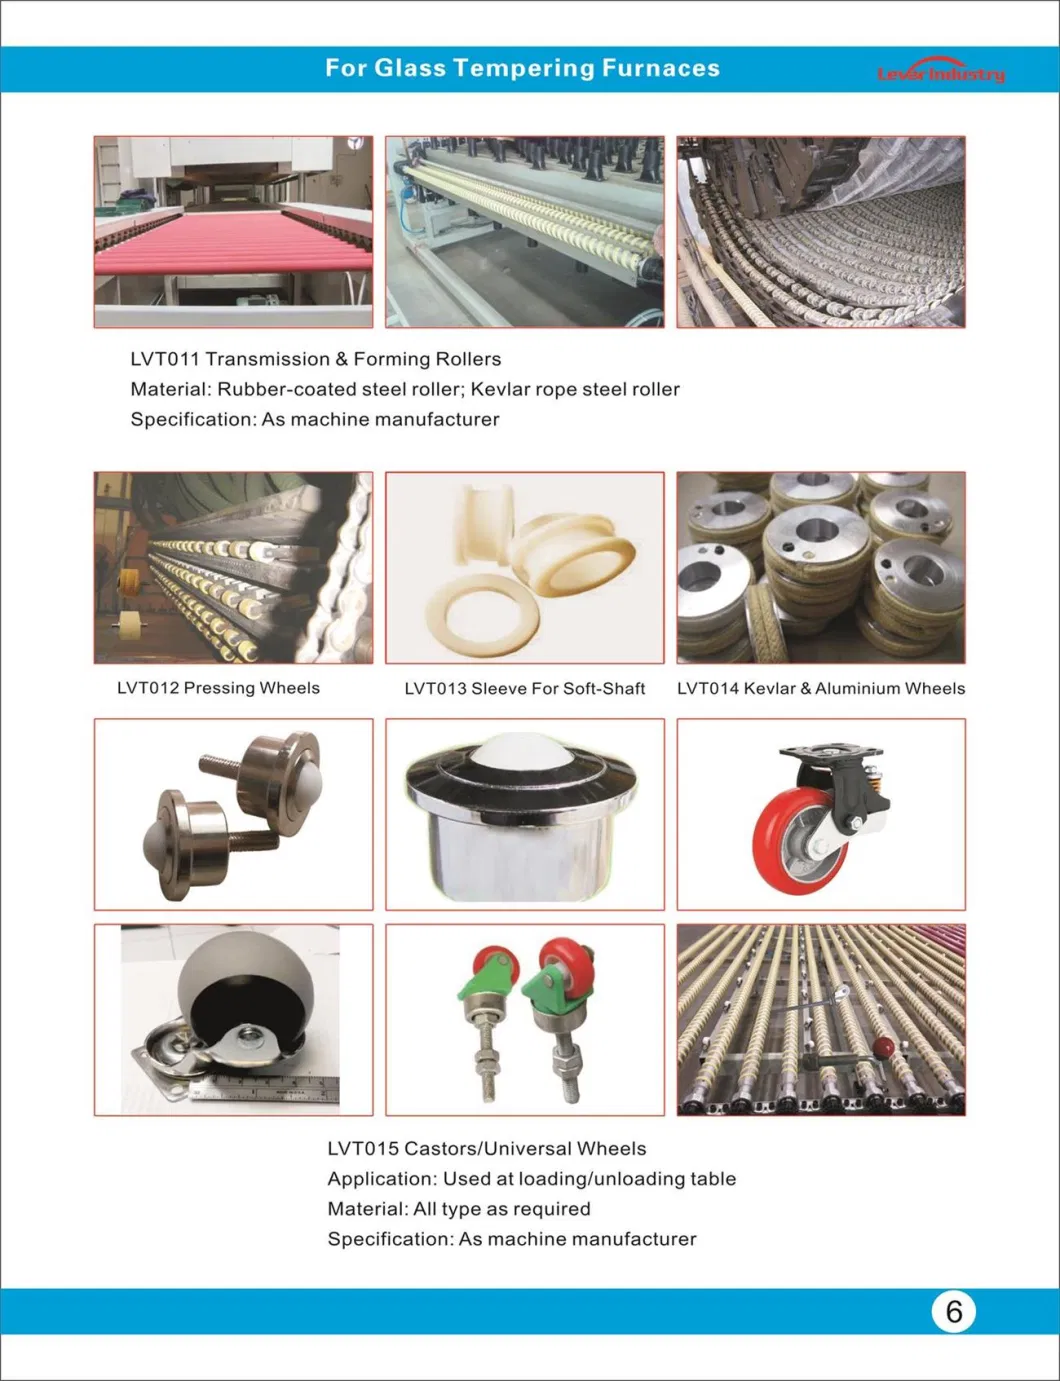 Spare Parts for Glass Tempering Furnace, Glass Tempering Furnace Spare Parts